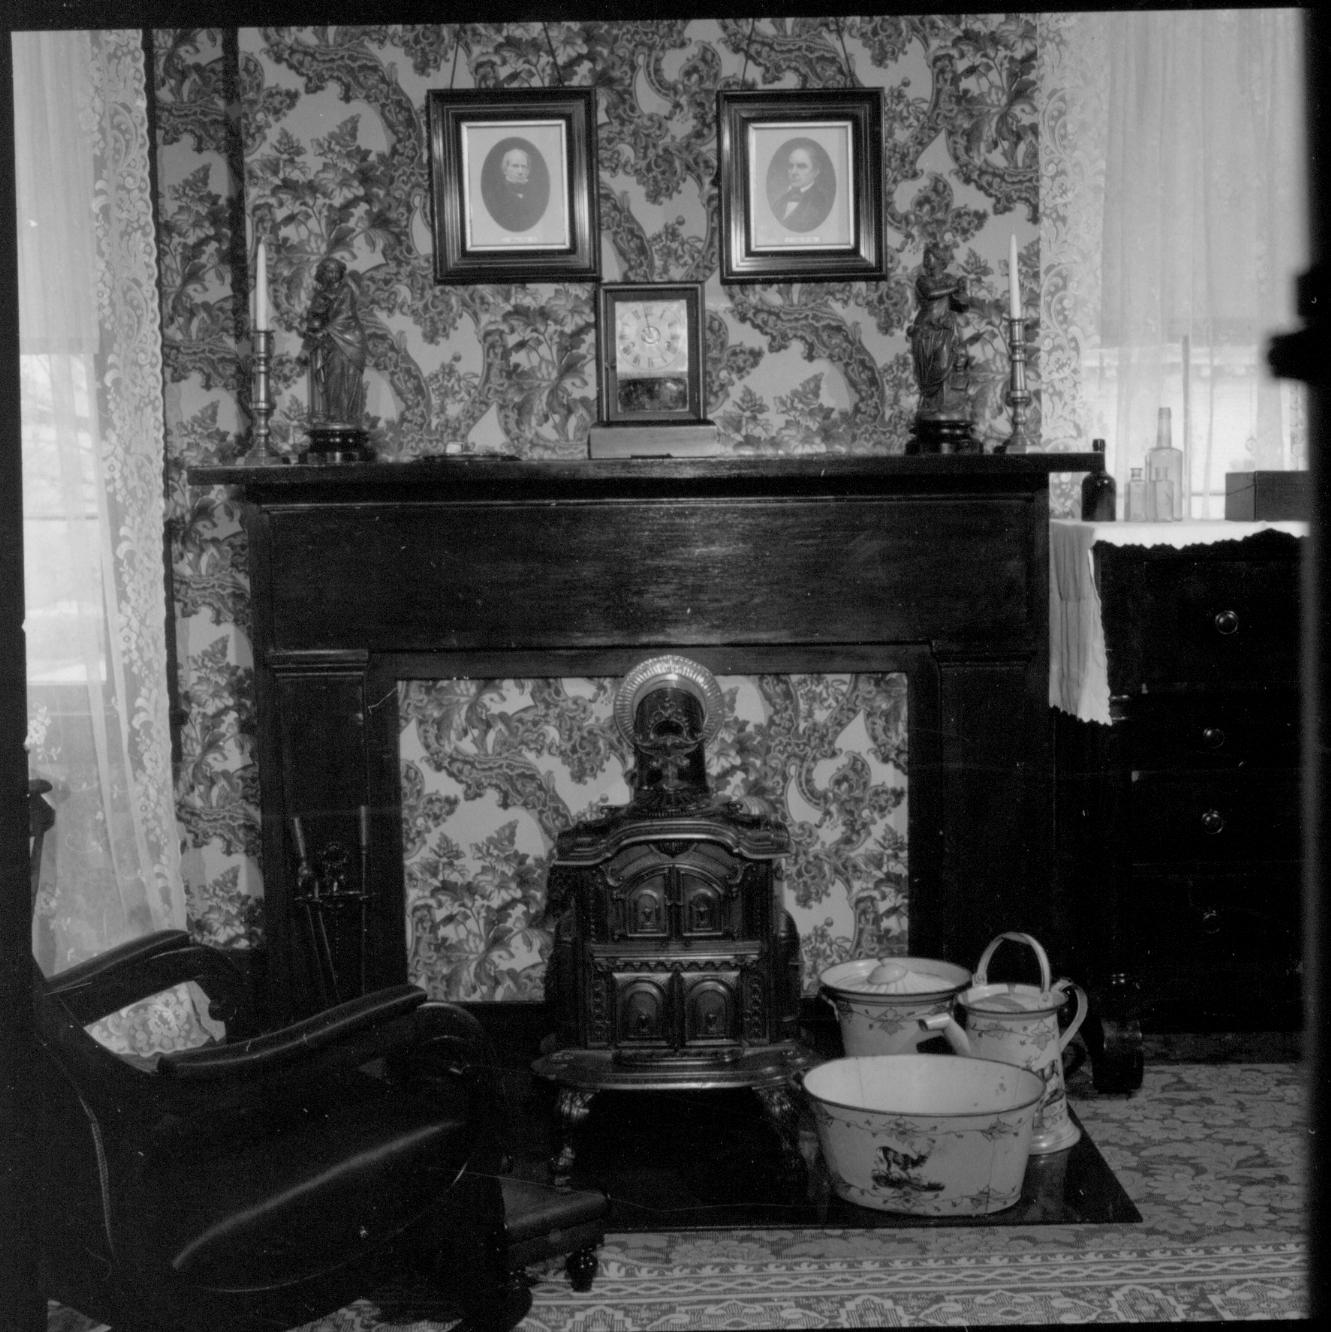 Mrs. Lincoln's Bedroom Lincoln Home, Mrs. Lincoln bedroom, fireplace, rocking chair, buckets